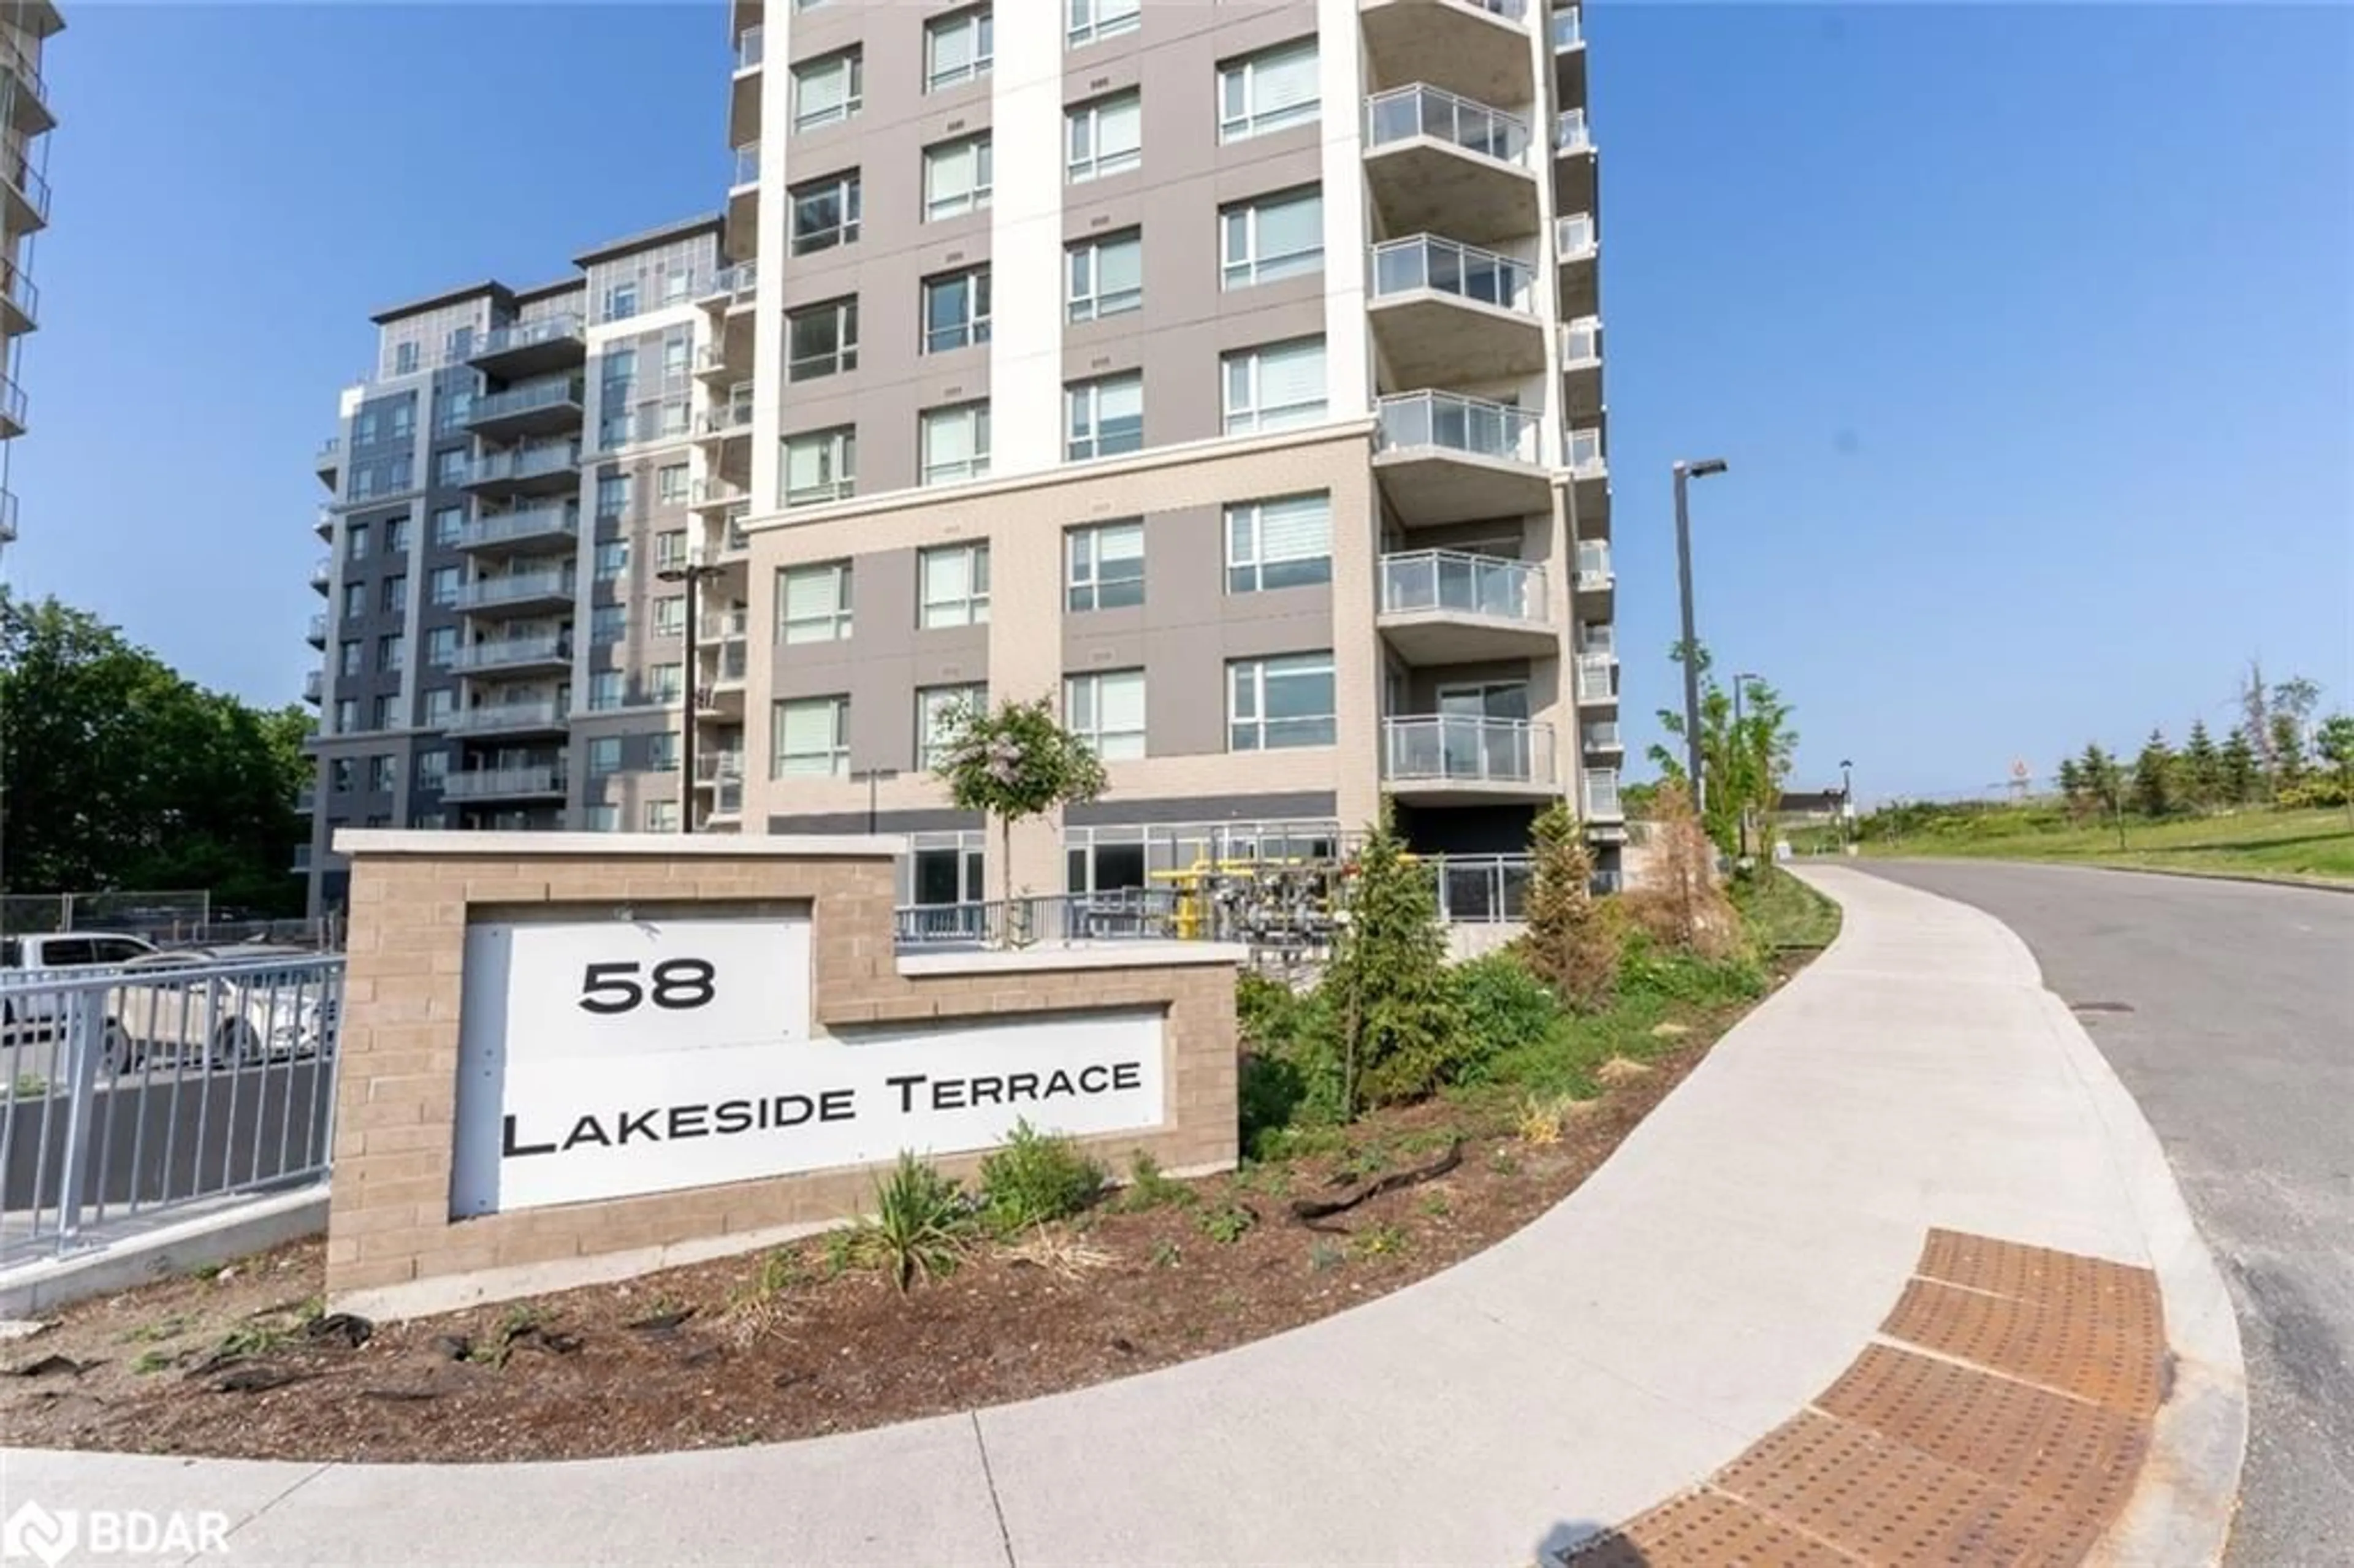 Lakeview for 58 Lakeside Terr #306, Barrie Ontario L4M 0L5